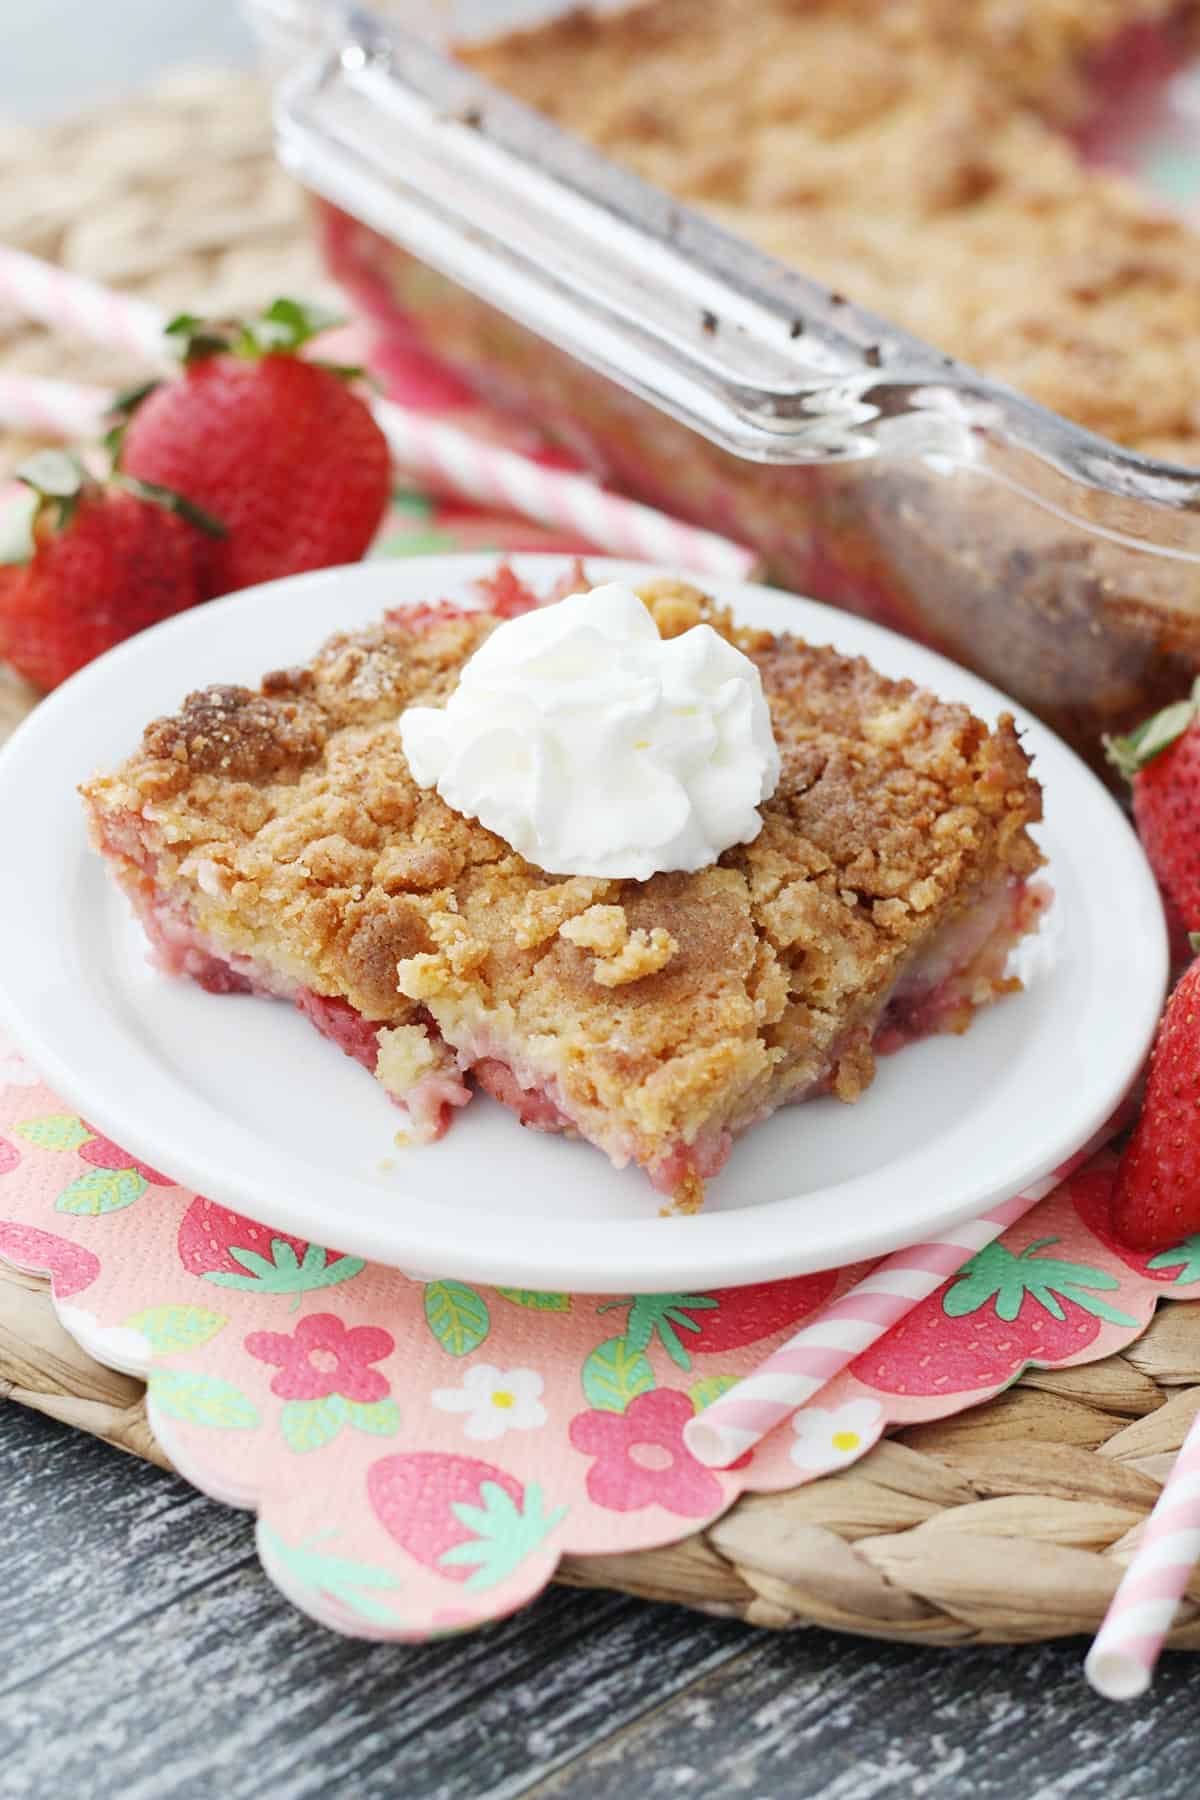 A slice of strawberry cobbler on a white plate.